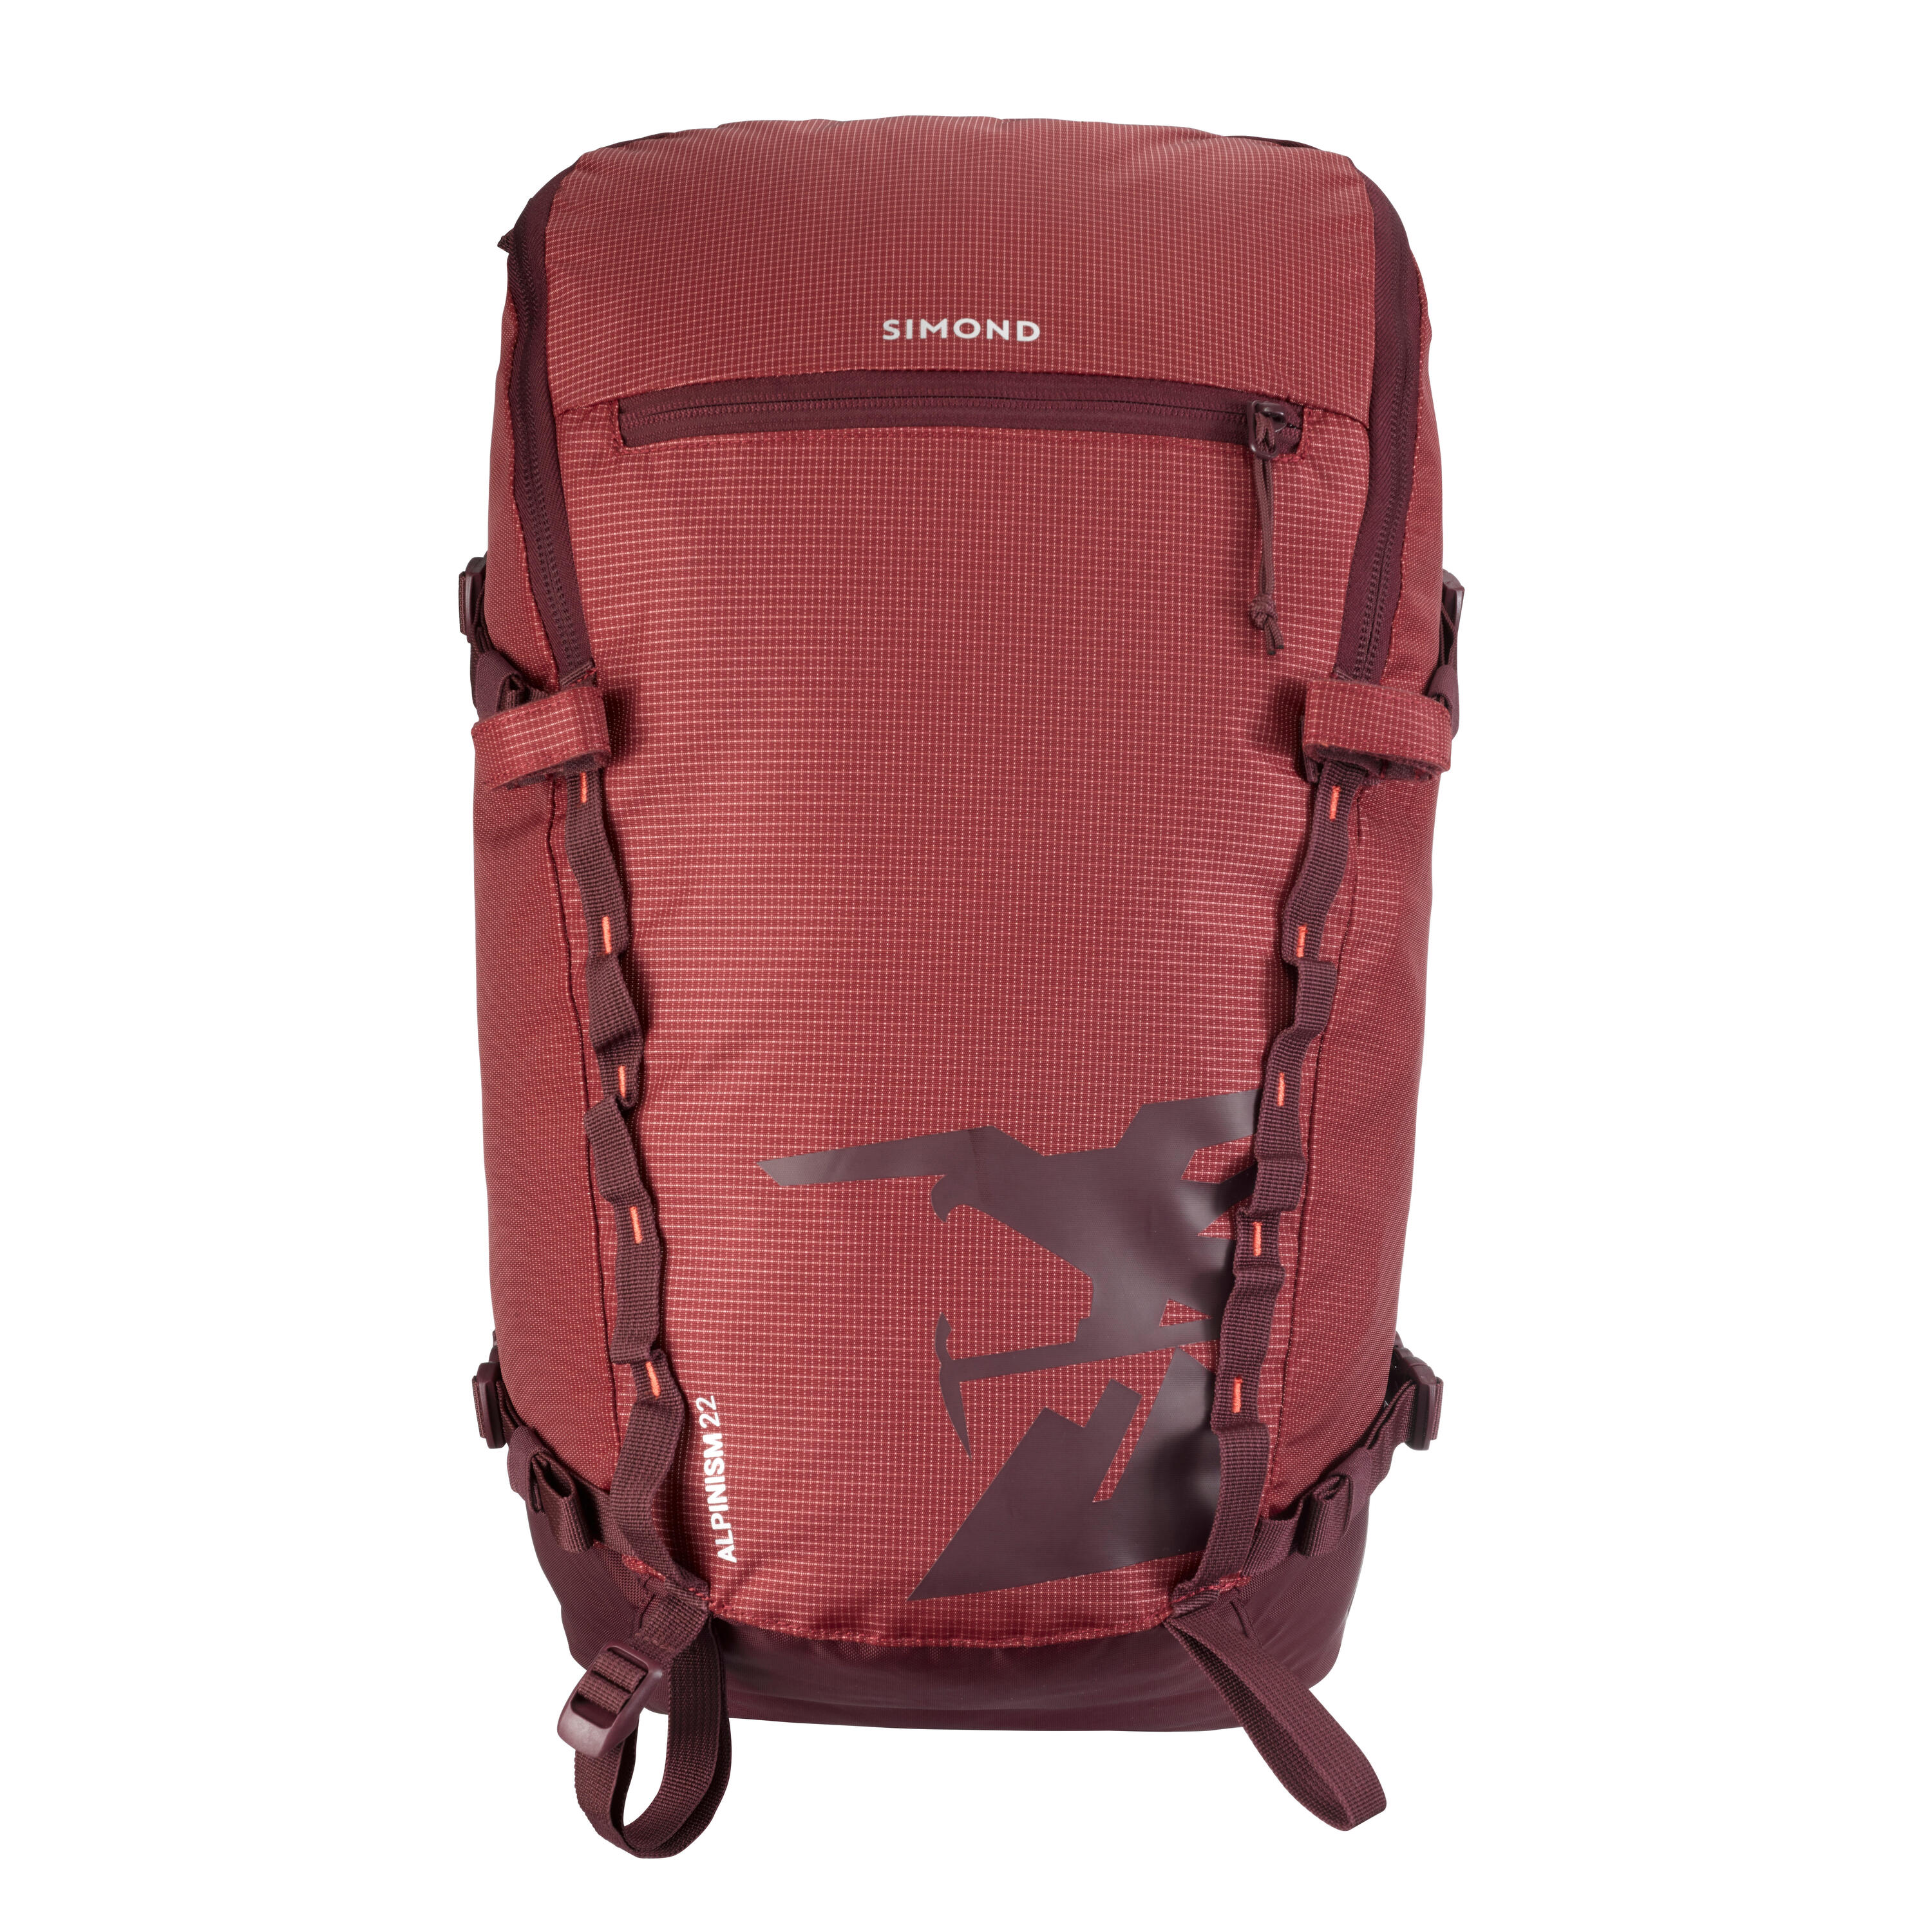 22-litre mountaineering backpack ALPINISM 22 - BURGUNDY 10/11